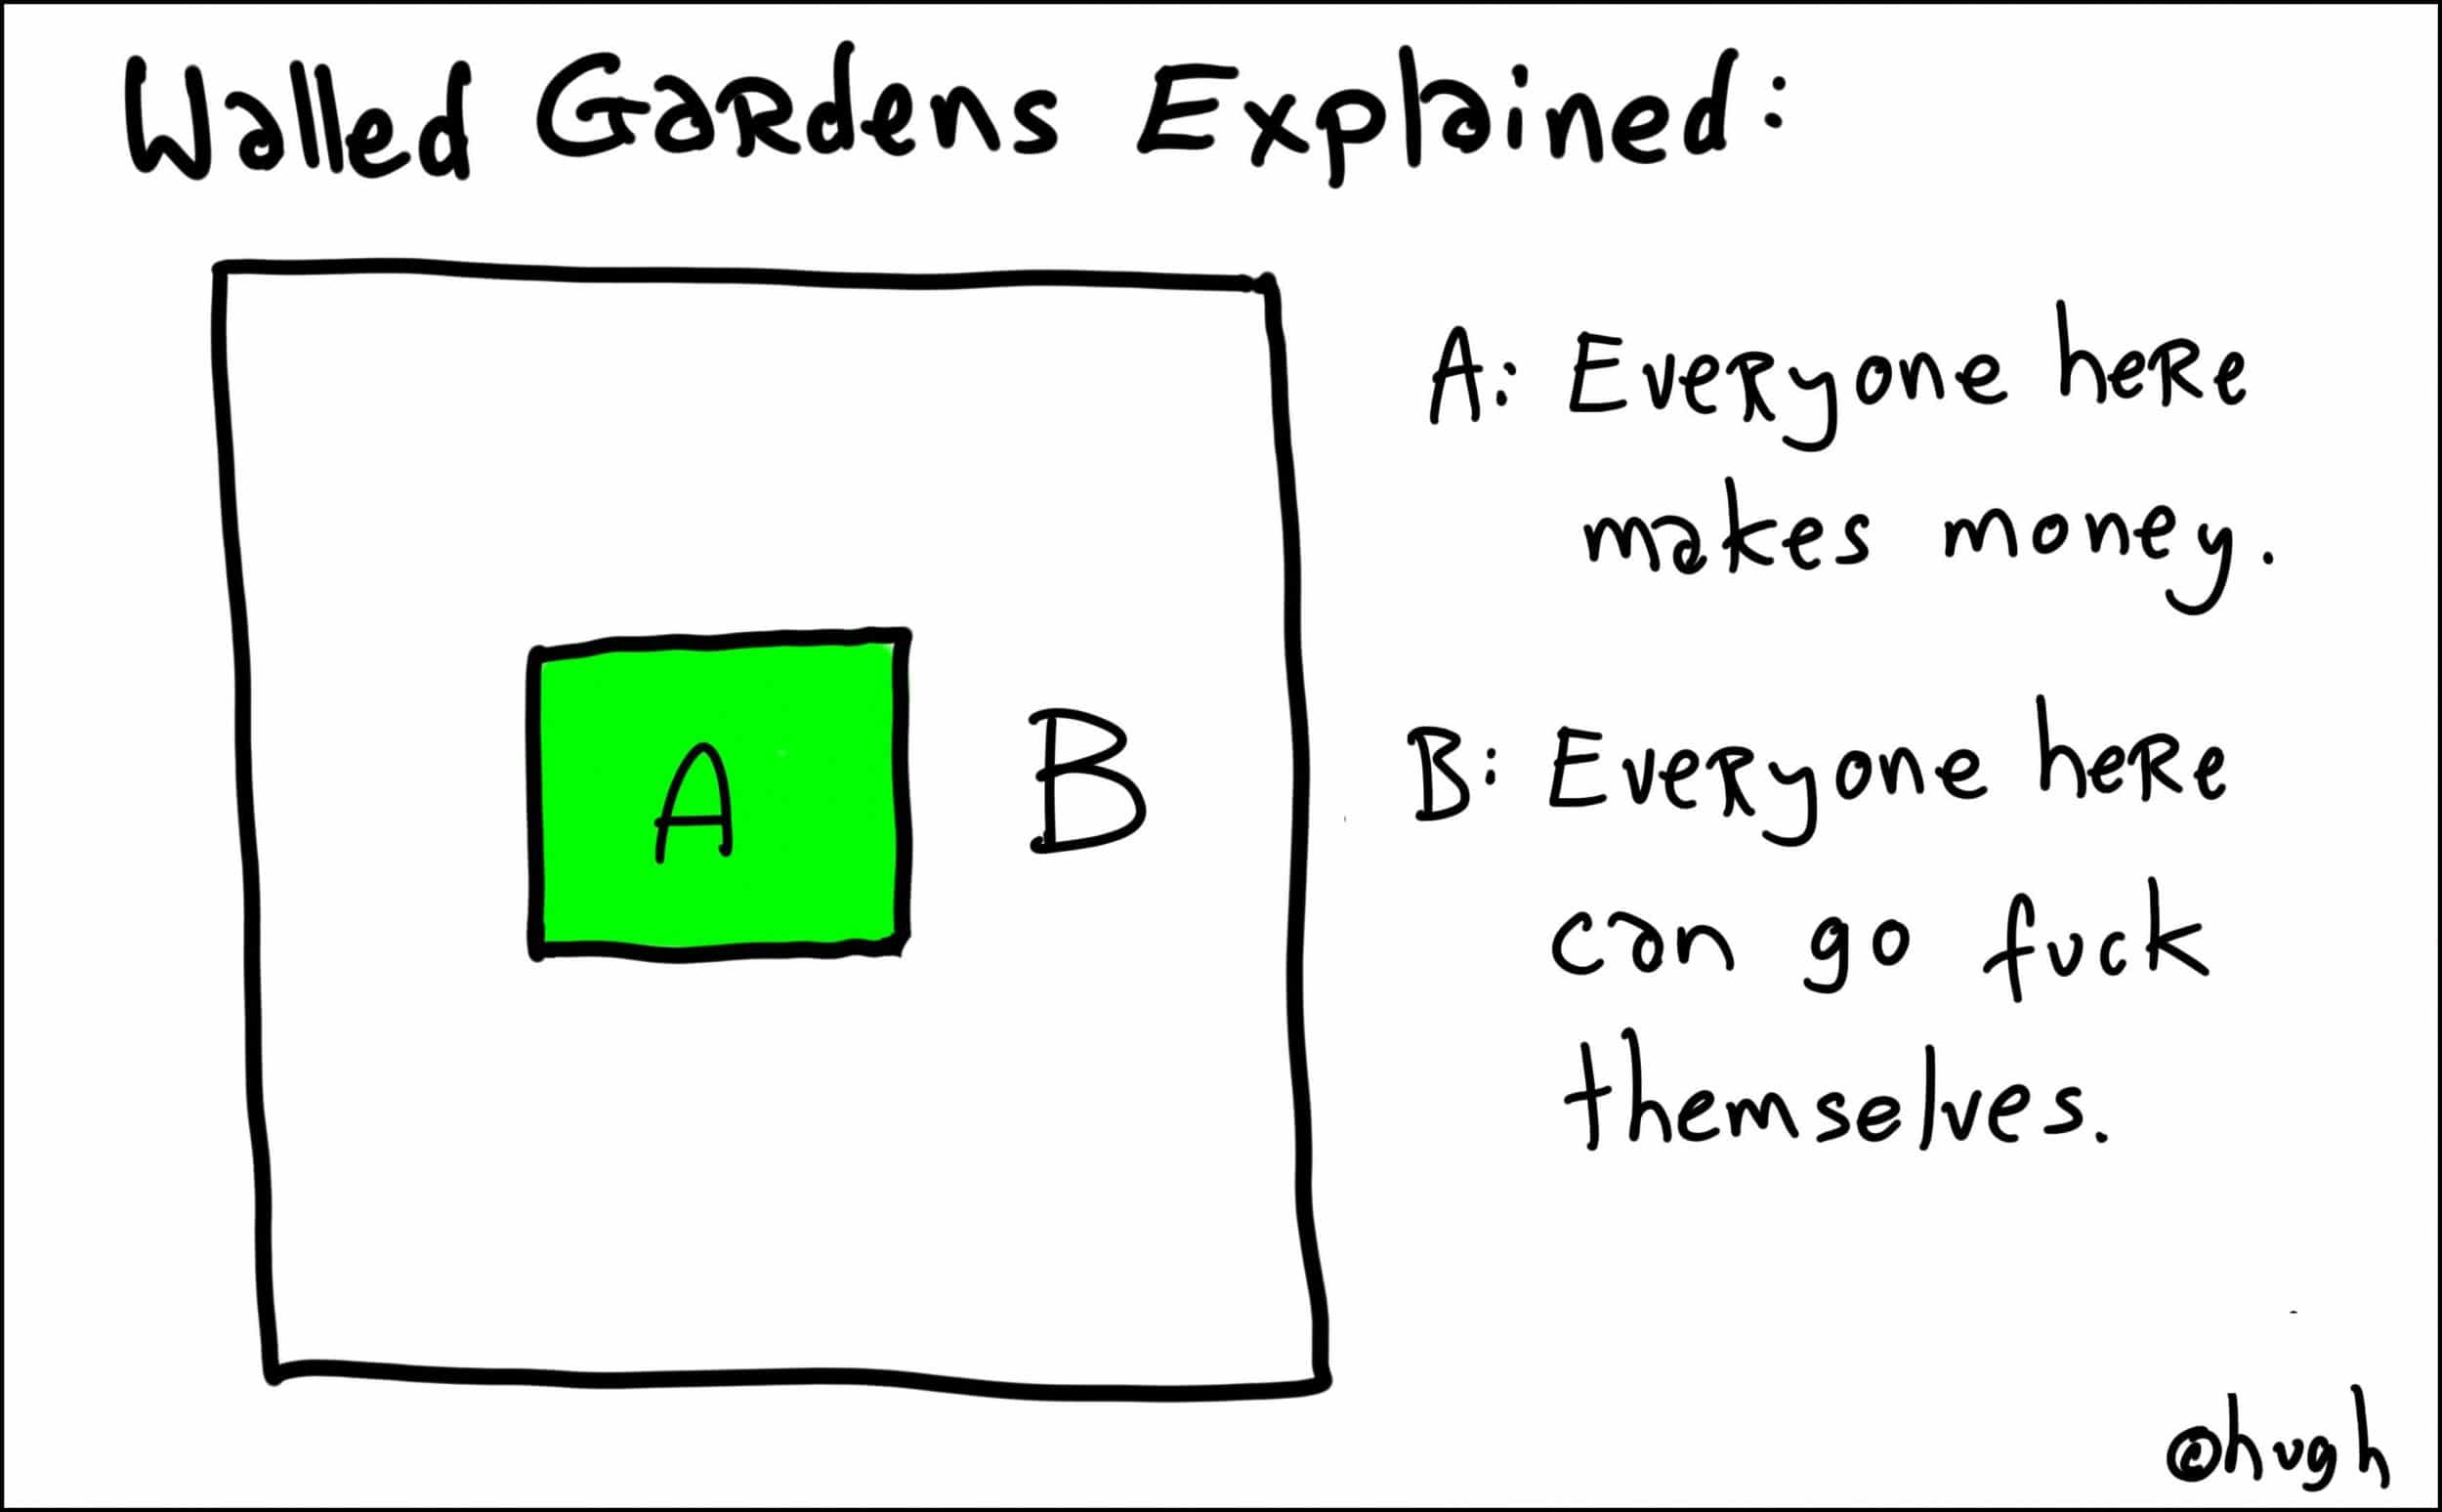 walledgardens_explained-scaled